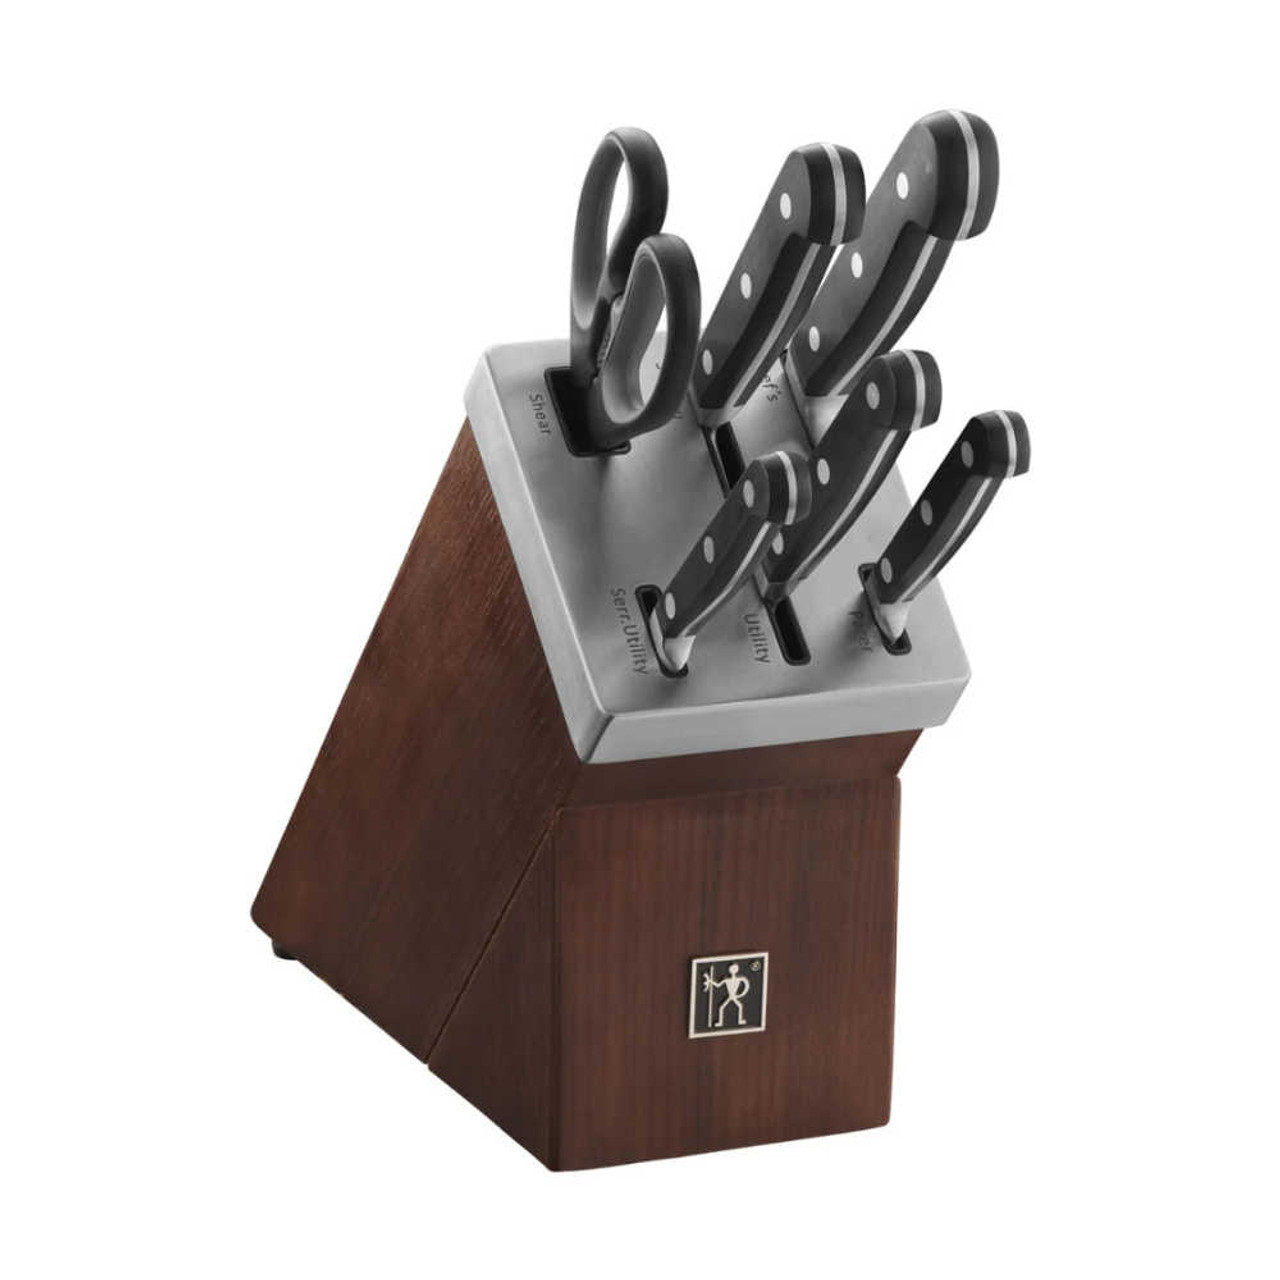 https://cdn11.bigcommerce.com/s-hccytny0od/images/stencil/1280x1280/products/5171/22350/Henckels_Classic_7-Piece_Self-Sharpening_Knife_Block_Set_1__53777.1668889203.jpg?c=2?imbypass=on